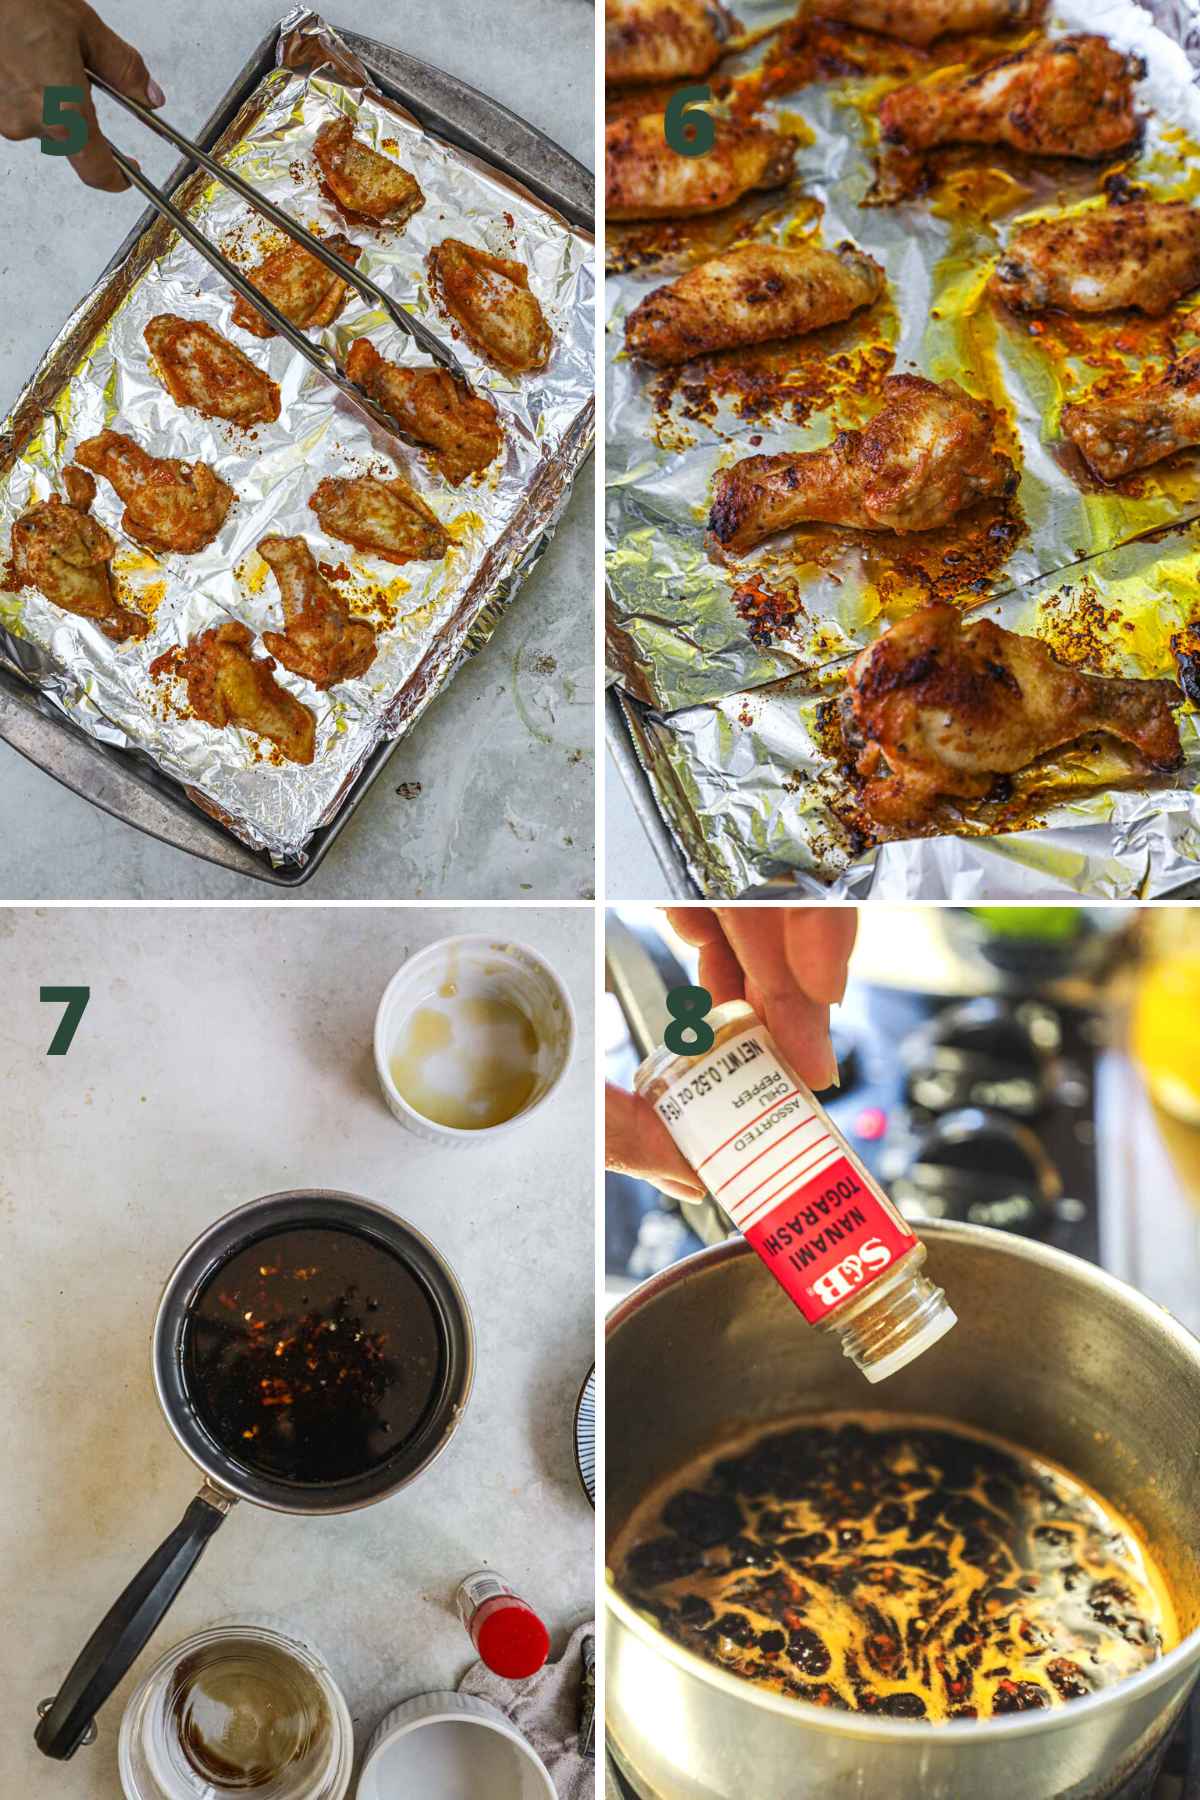 Steps to make honey soy garlic chicken wings, turning over wings and baking, making the honey soy garlic sauce with togarashi.